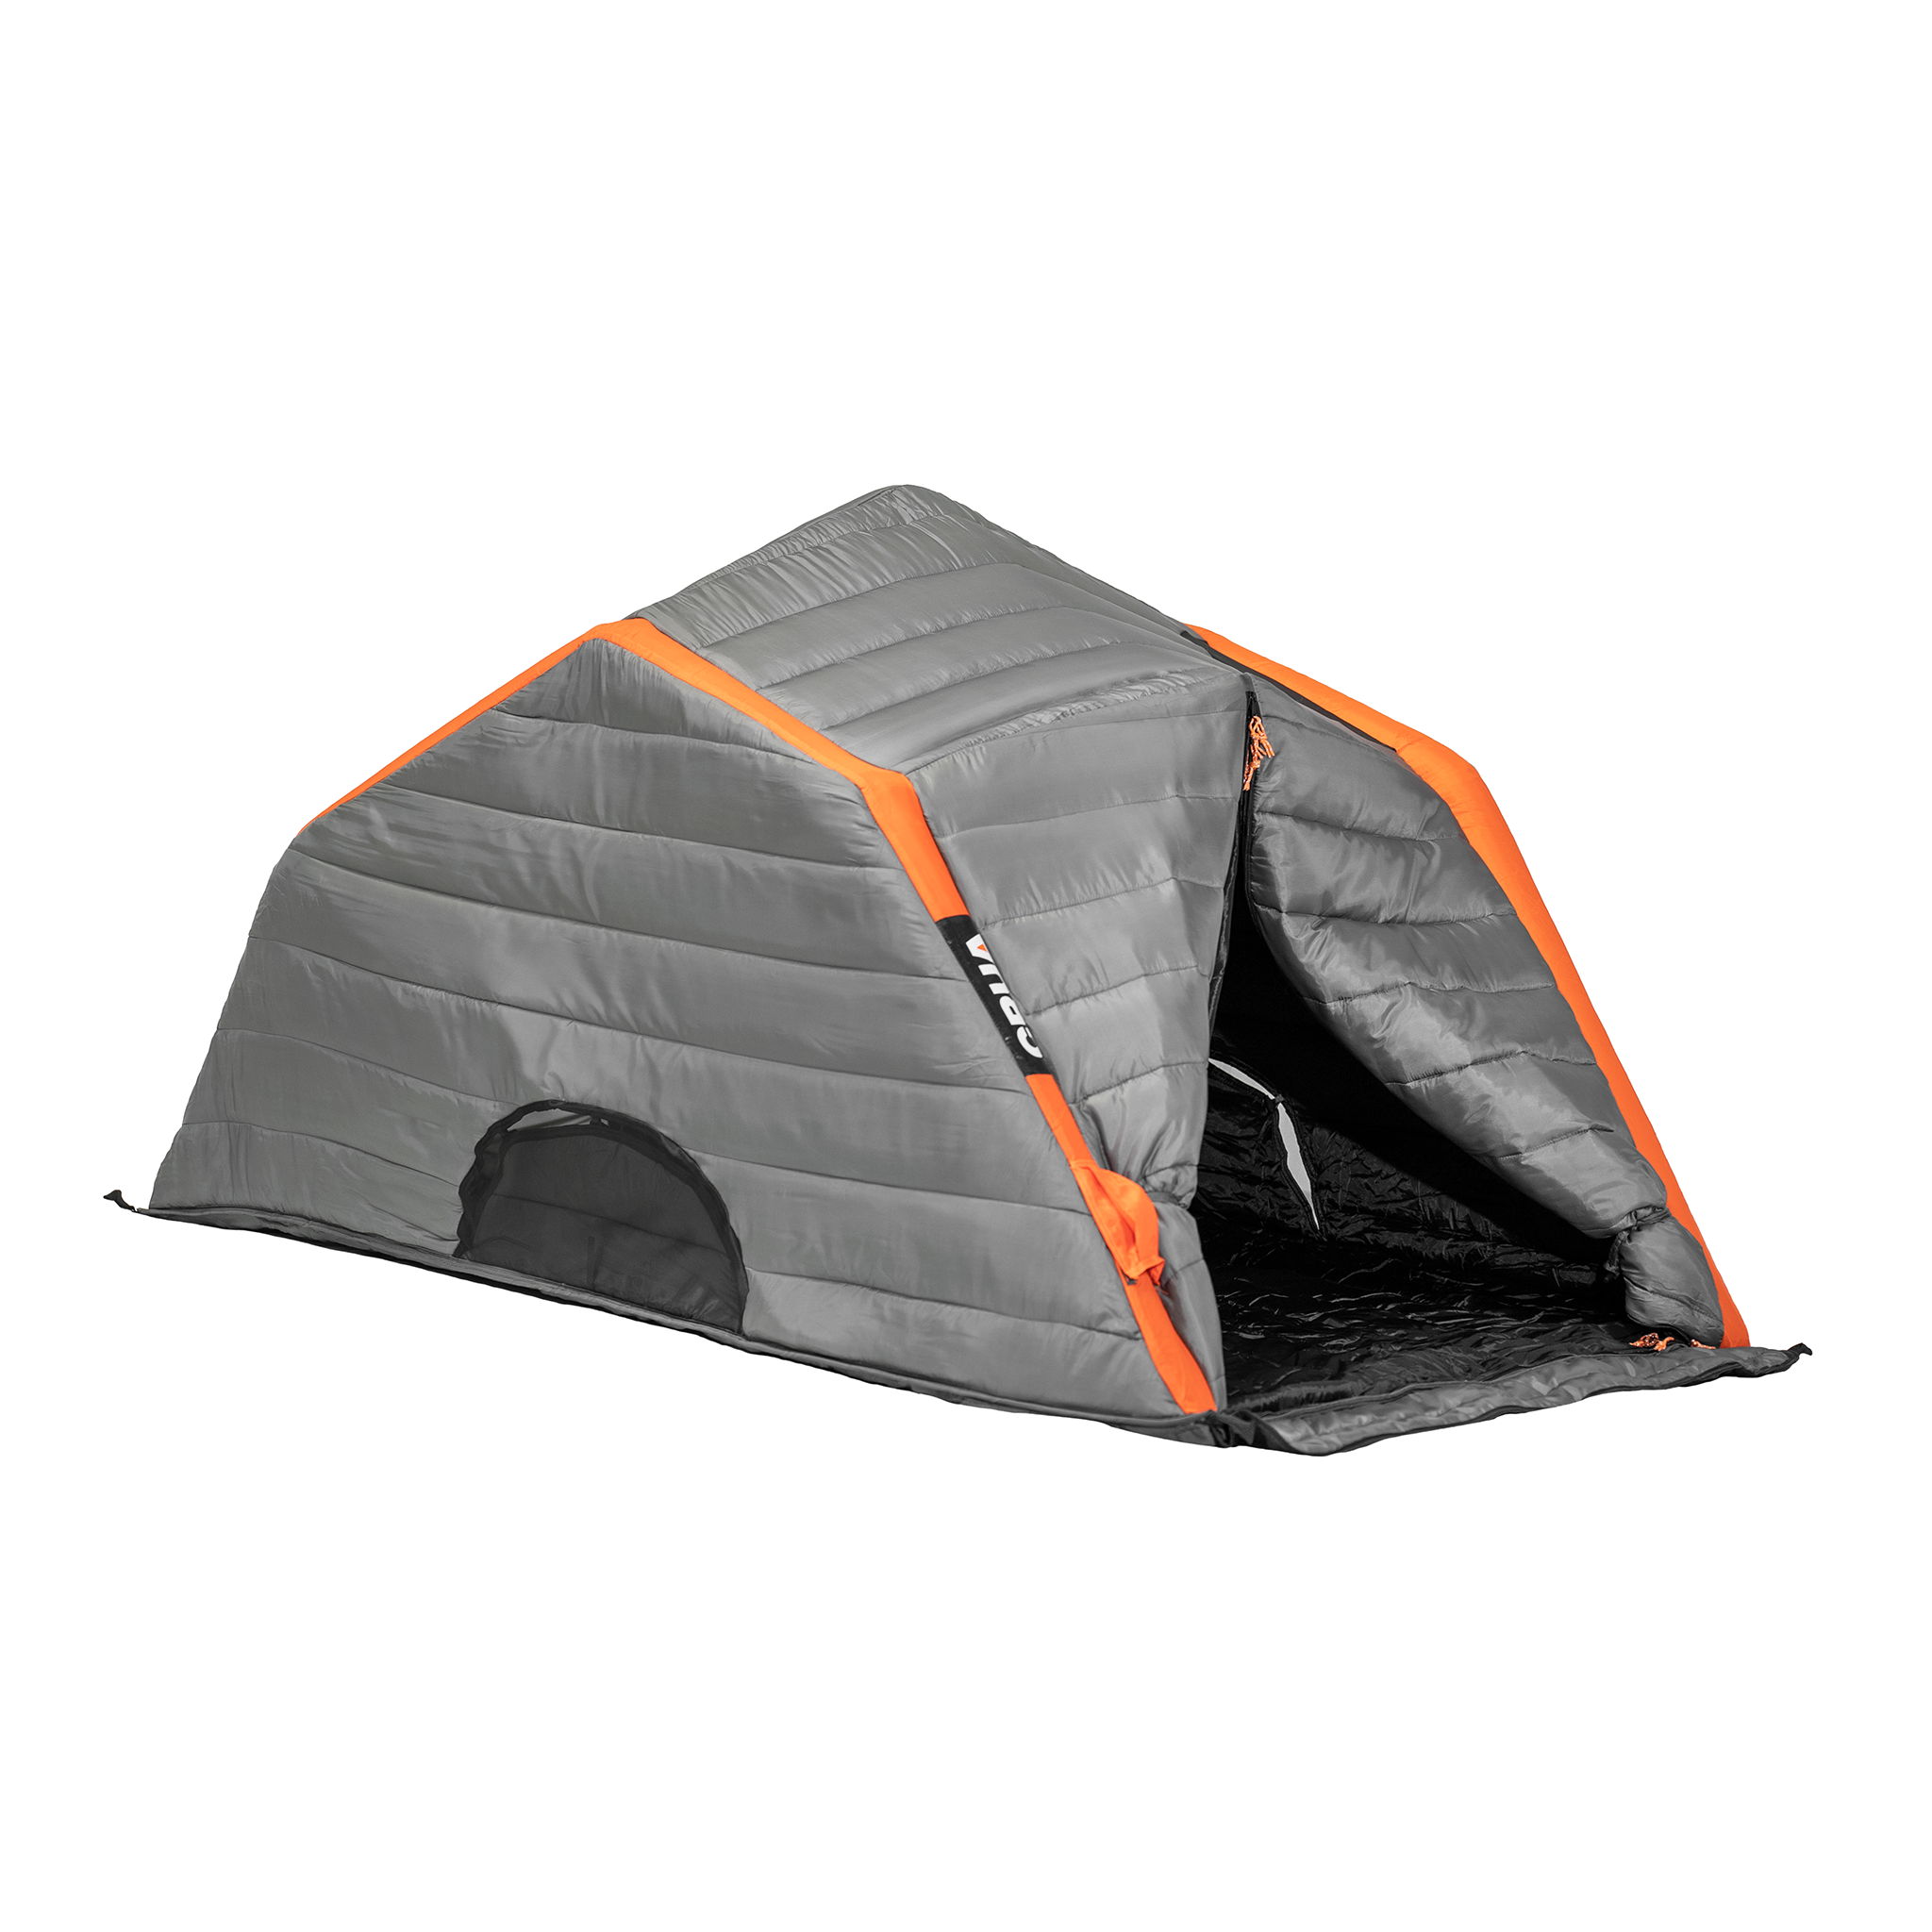 CULLA HAUL | 2 PERSON INSULATED INNER TENT WITH TEMPERATURE REGULATING, NOISE DAMPENING AND LIGHT BLOCKING FEATURES